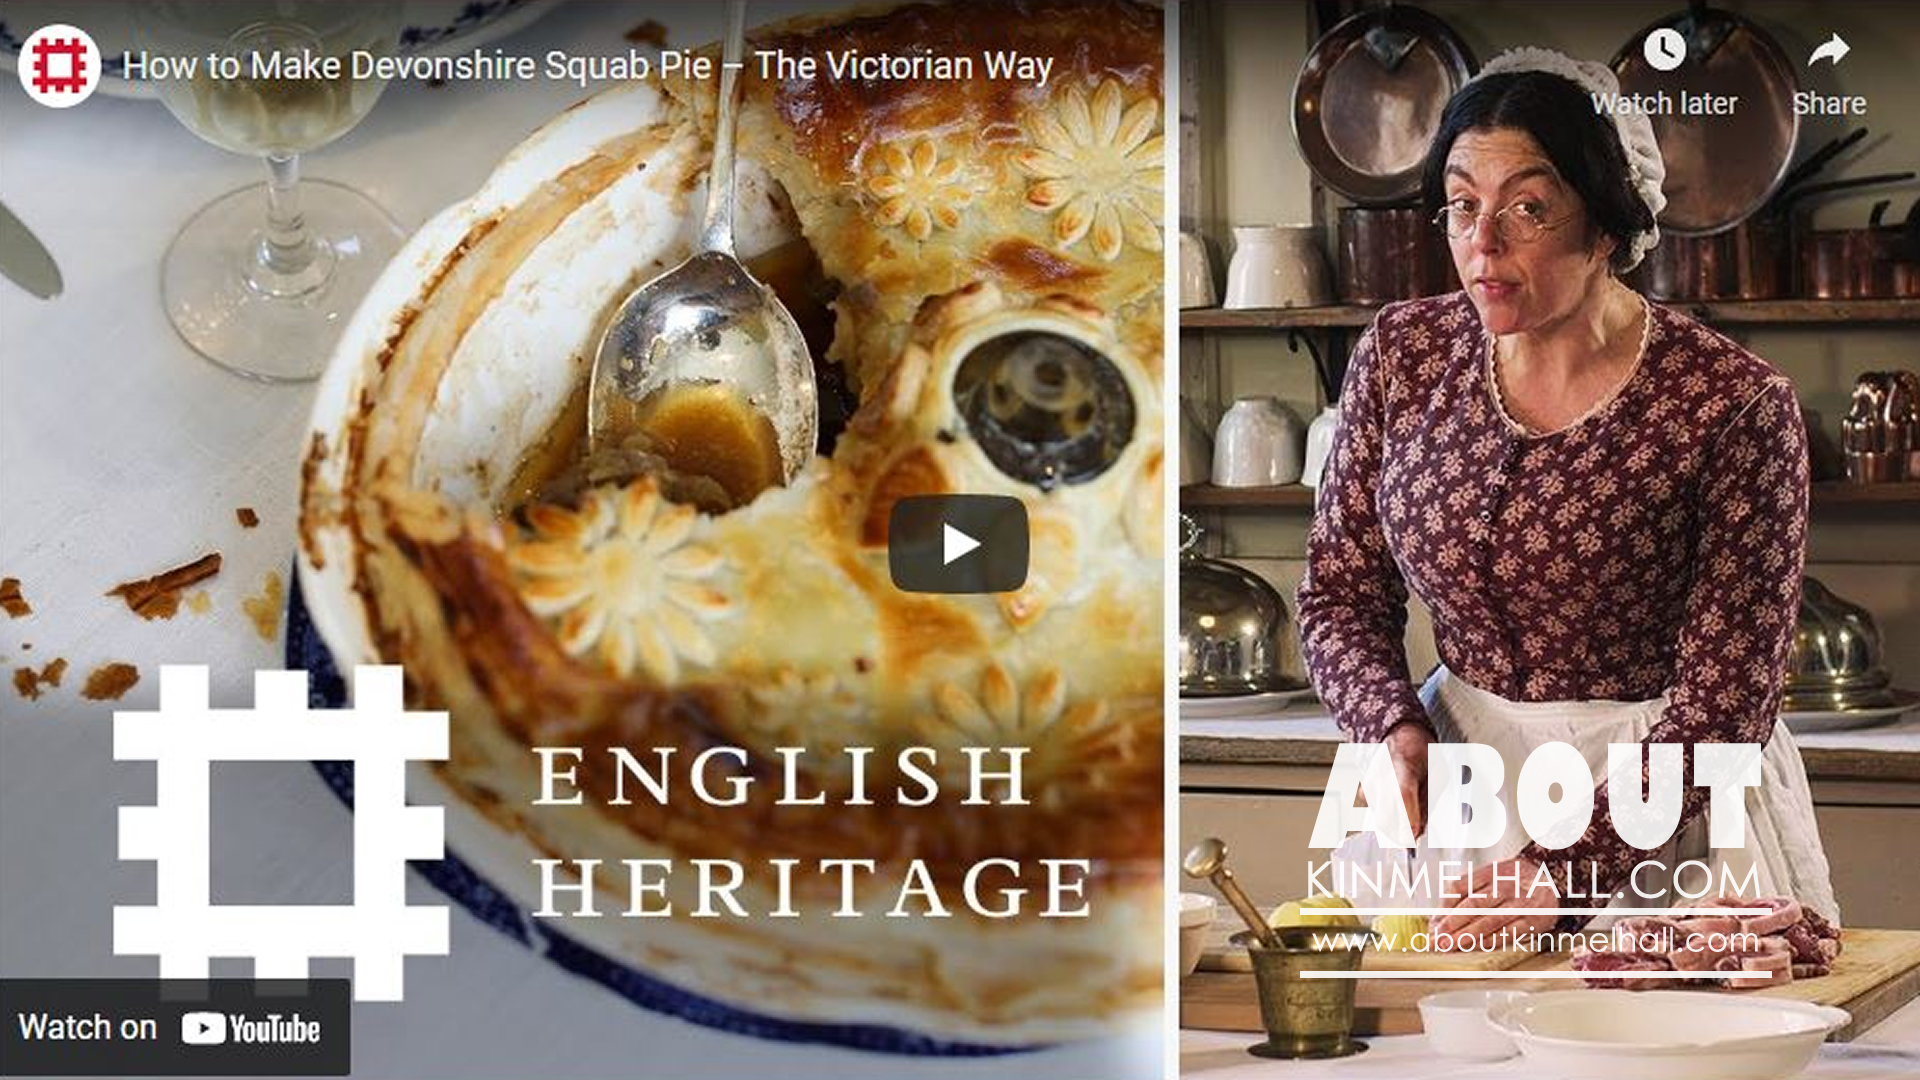 Education Resources - Victorian Cookery Session 12 by English Heritage